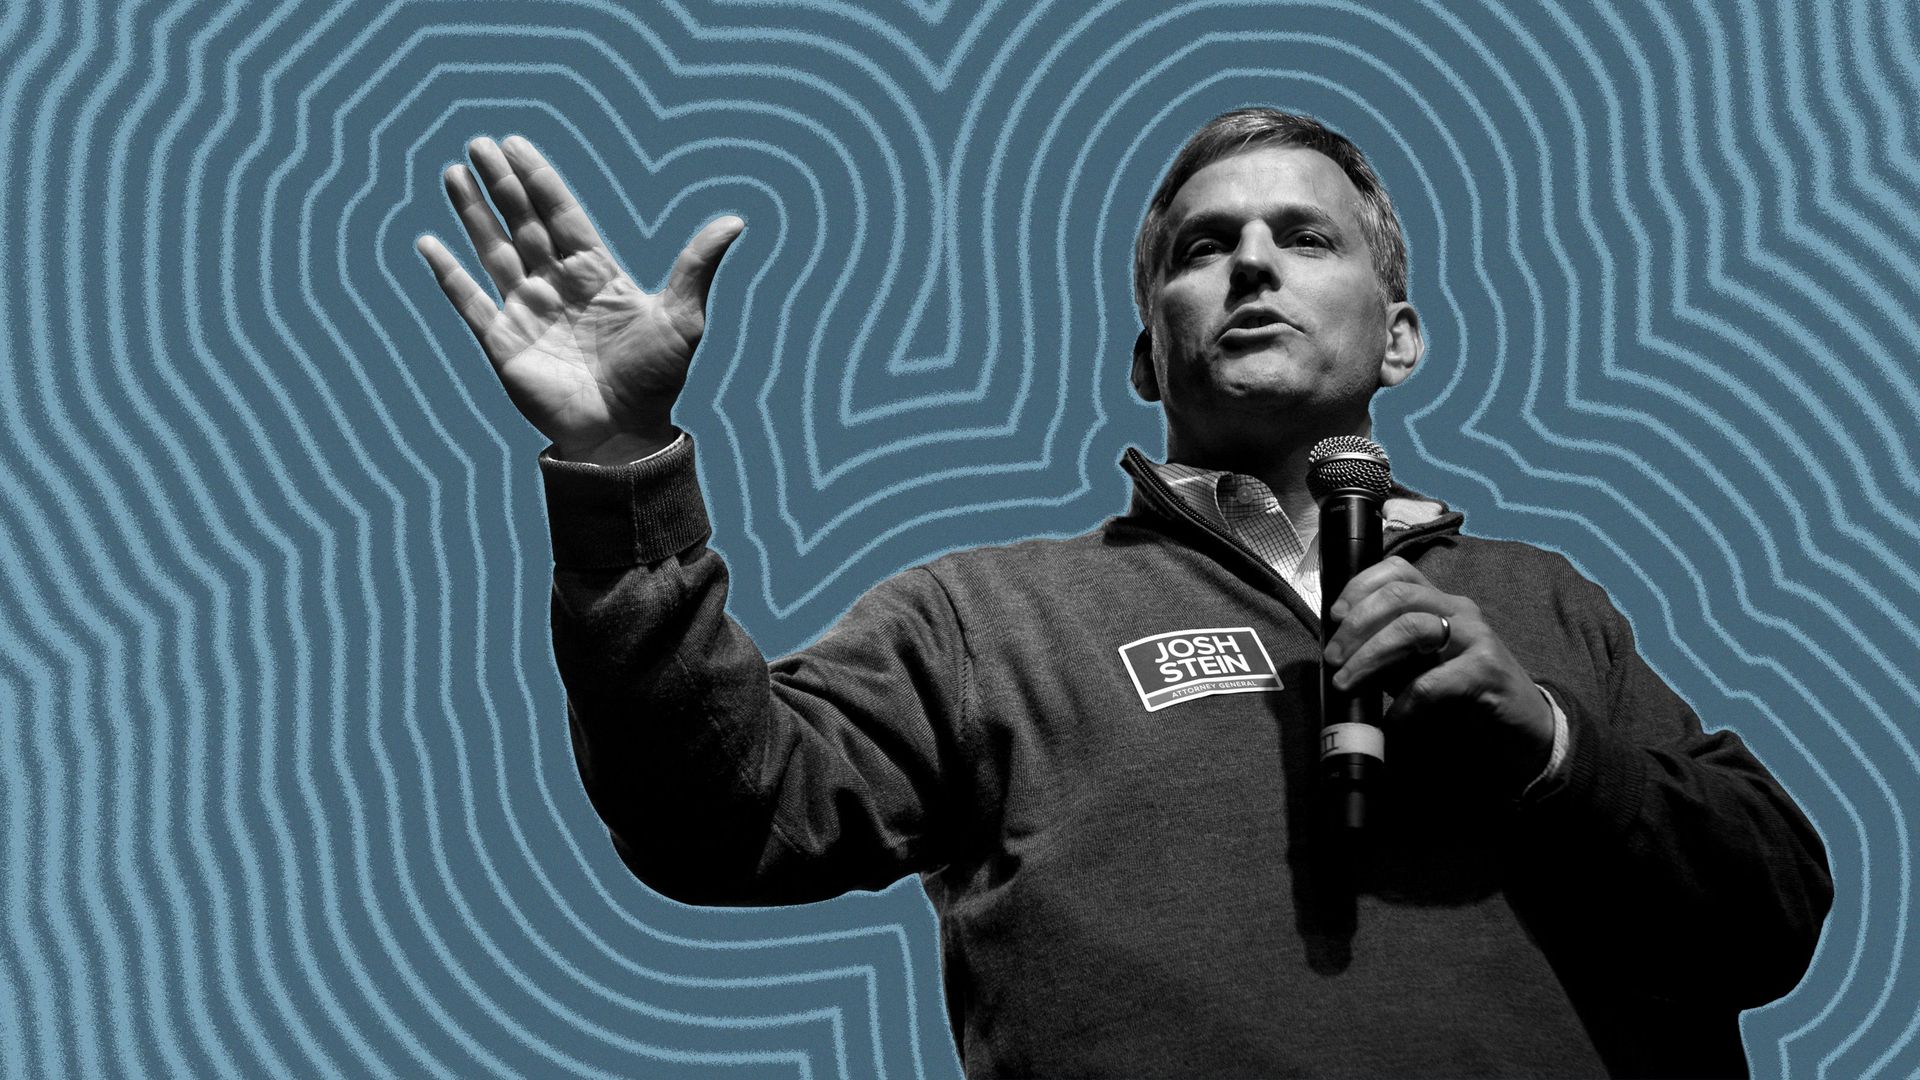 Photo illustration of North Carolina Attorney General, Josh Stein, with lines radiating from him.